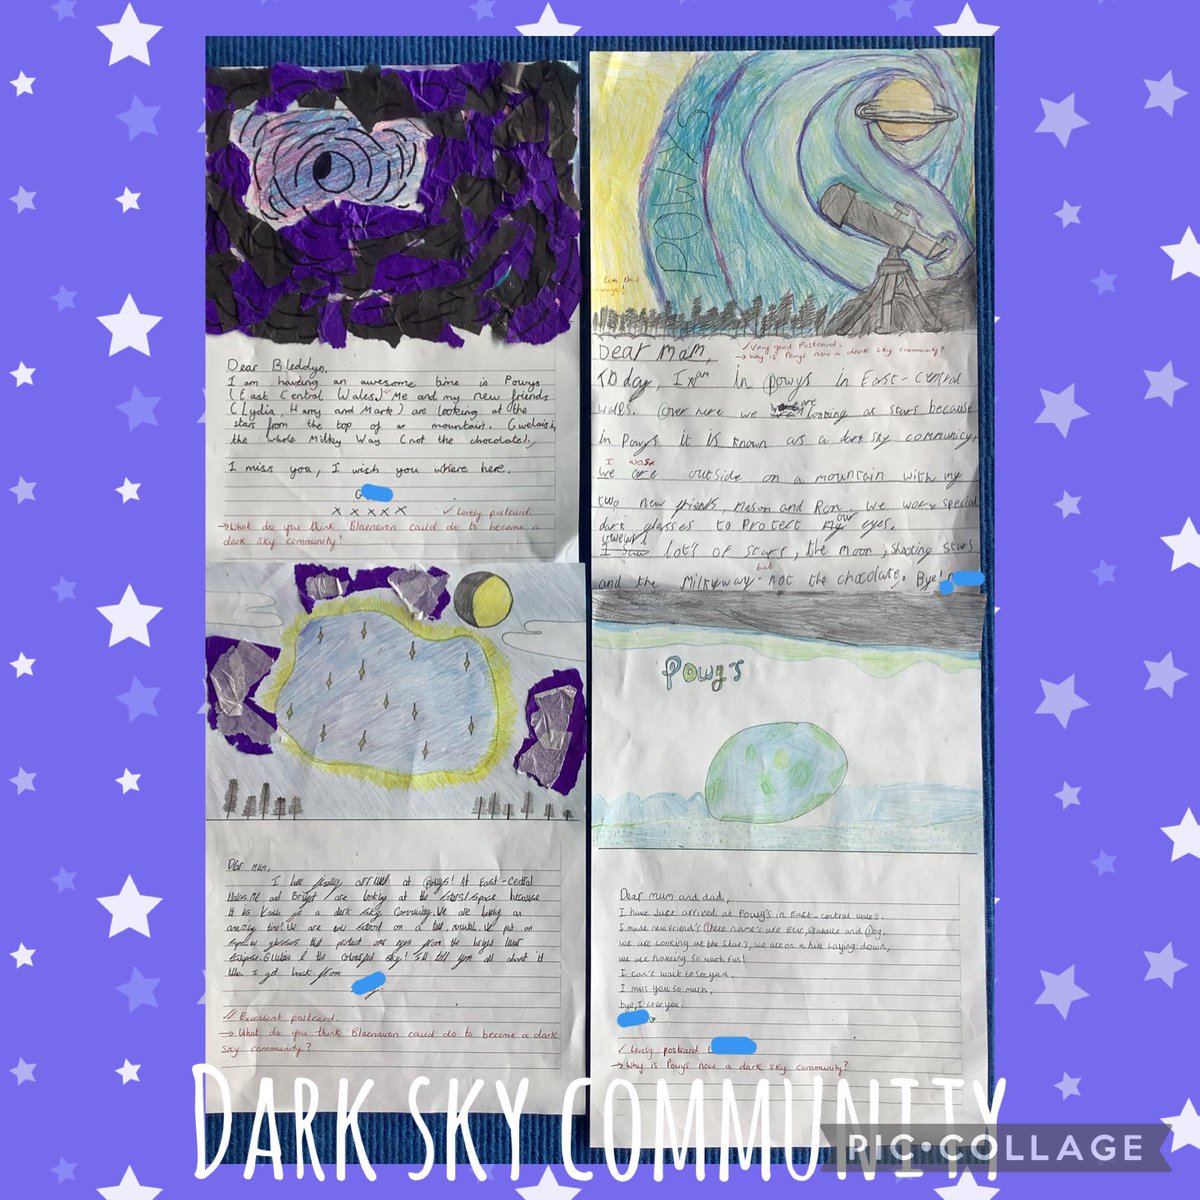 Year 5 pupils in Ty Godwith have enjoyed looking into their new topic and exploring space. This week they have looked at Powys, our very own dark sky community. #wales #ethicallyinformed